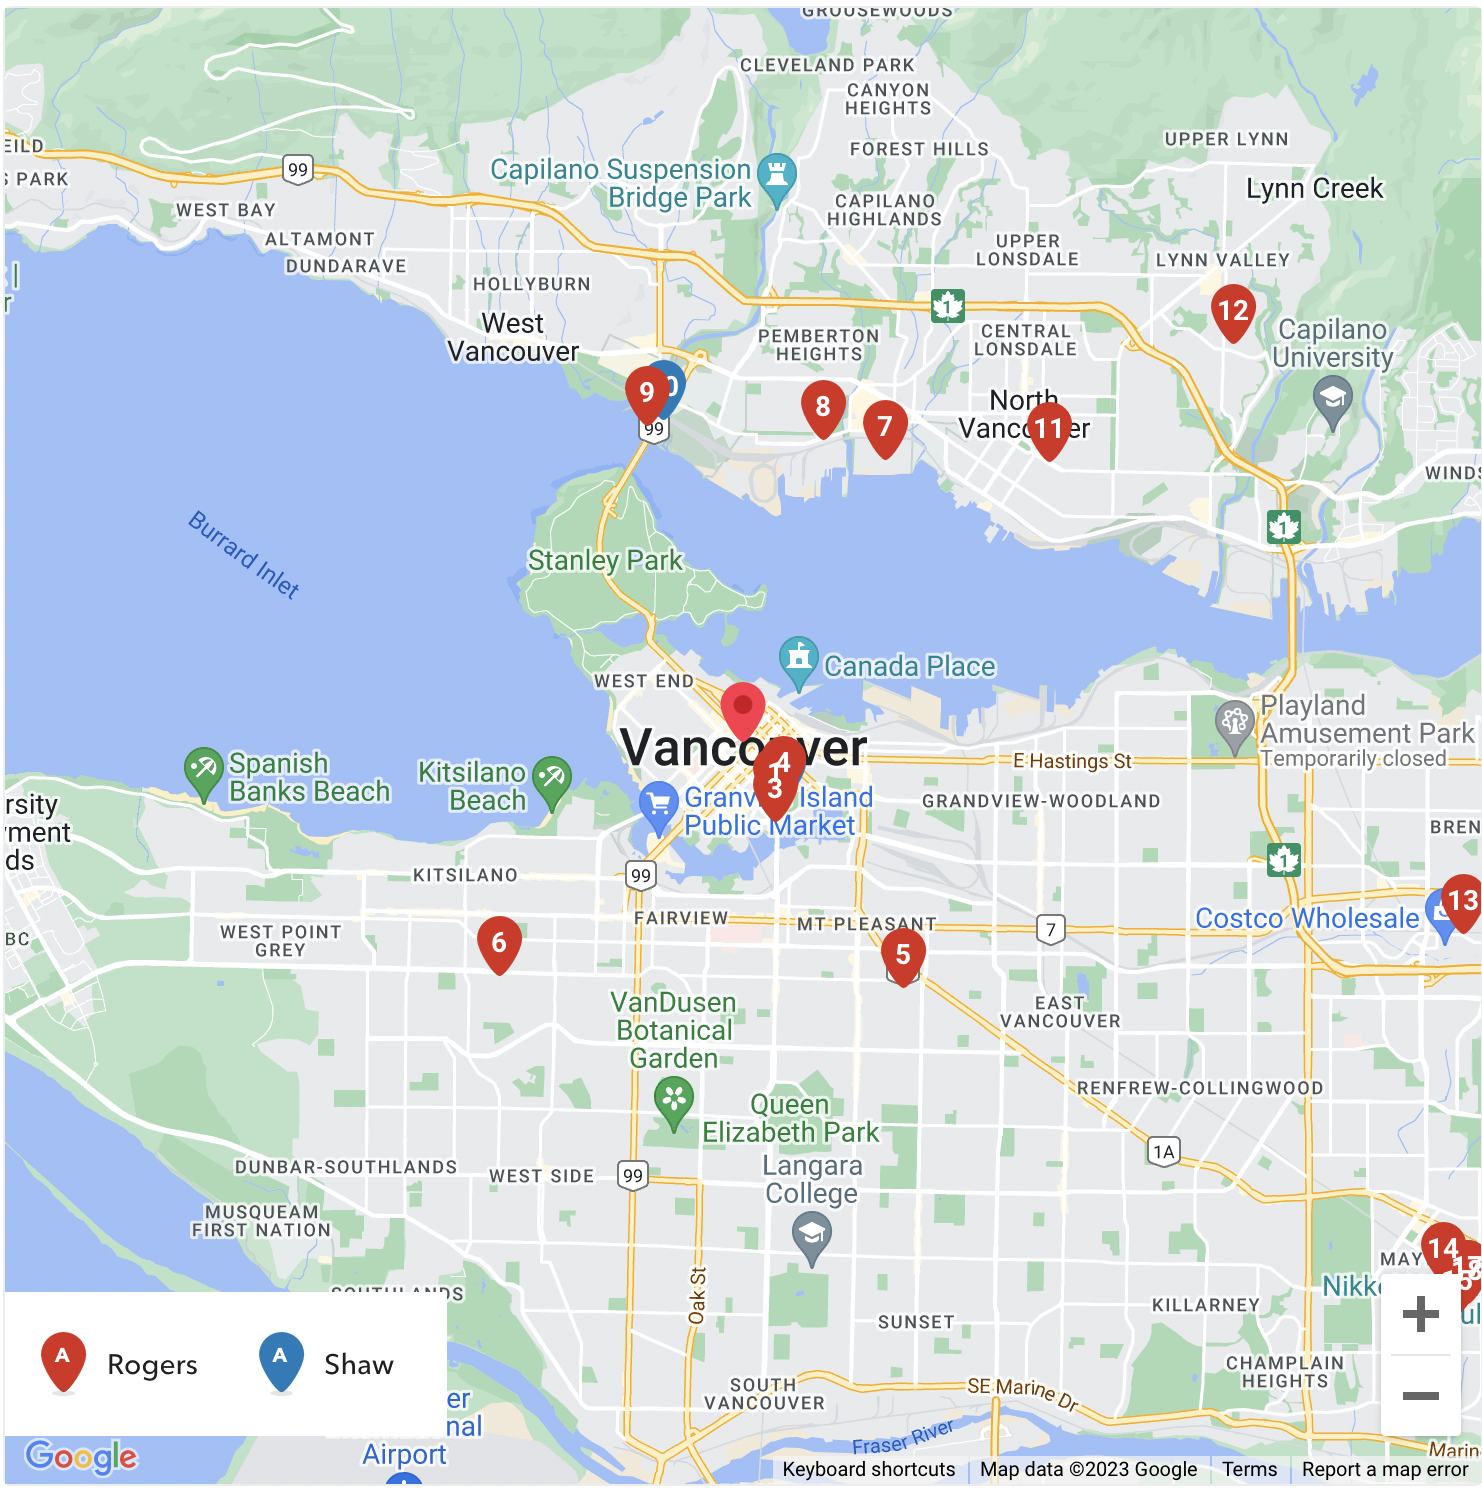 Shaw and Roges Dealer Stores Located in Vancouver